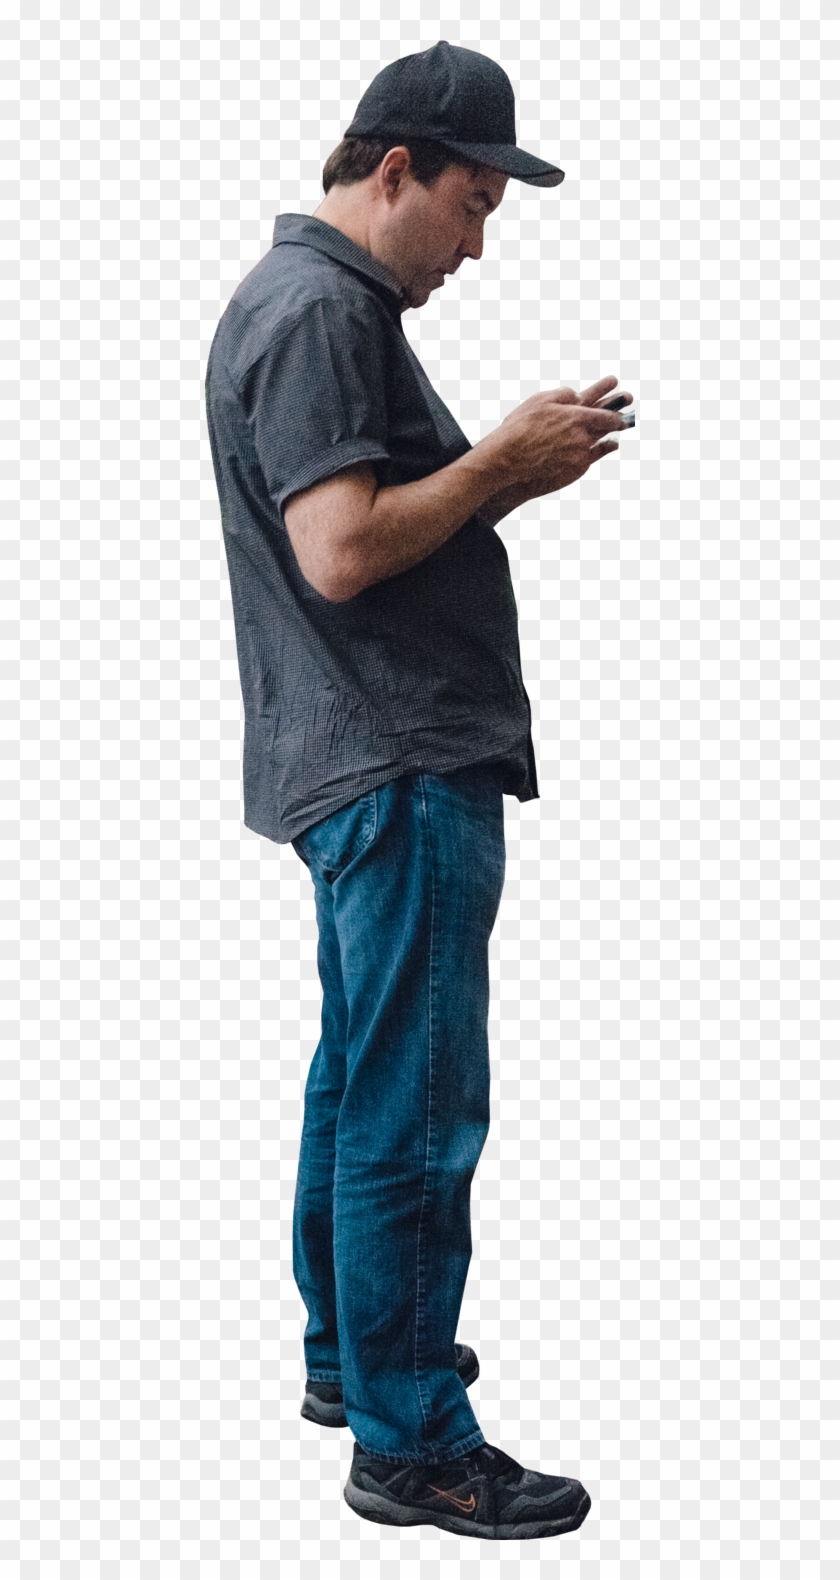 https://www.pngfind.com/pngs/m/375-3759430_manstandingtextingside-man-standing-by-side-hd-png-download.png